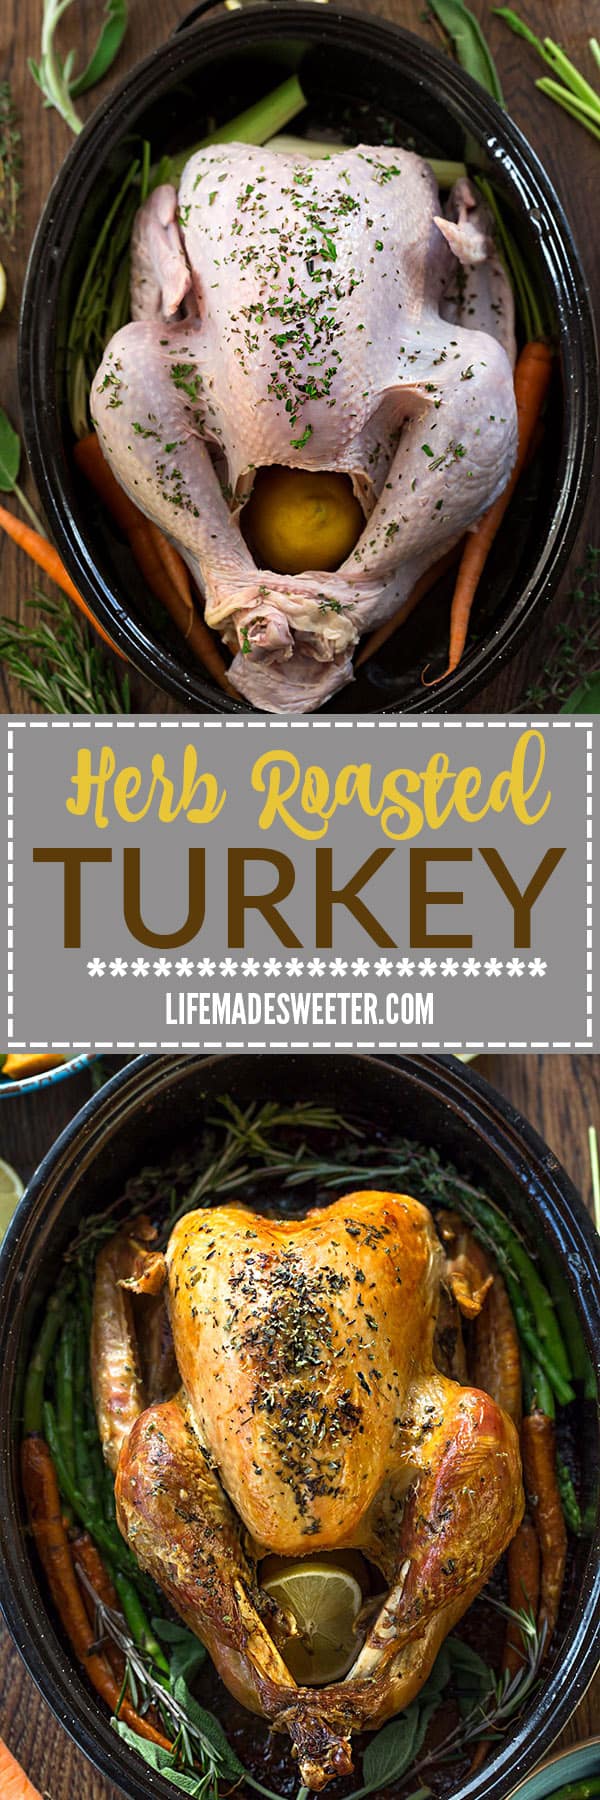 Herb Garlic Roasted Turkey makes the perfect addition to any holiday meal! Best of all, this foodproof recipe is my favorite go-to I use every year for Thanksgiving and Christmas. It's full of sage, thyme, rosemary and parsley and produces a tender, moist and juicy turkey with a gorgeous golden skin.